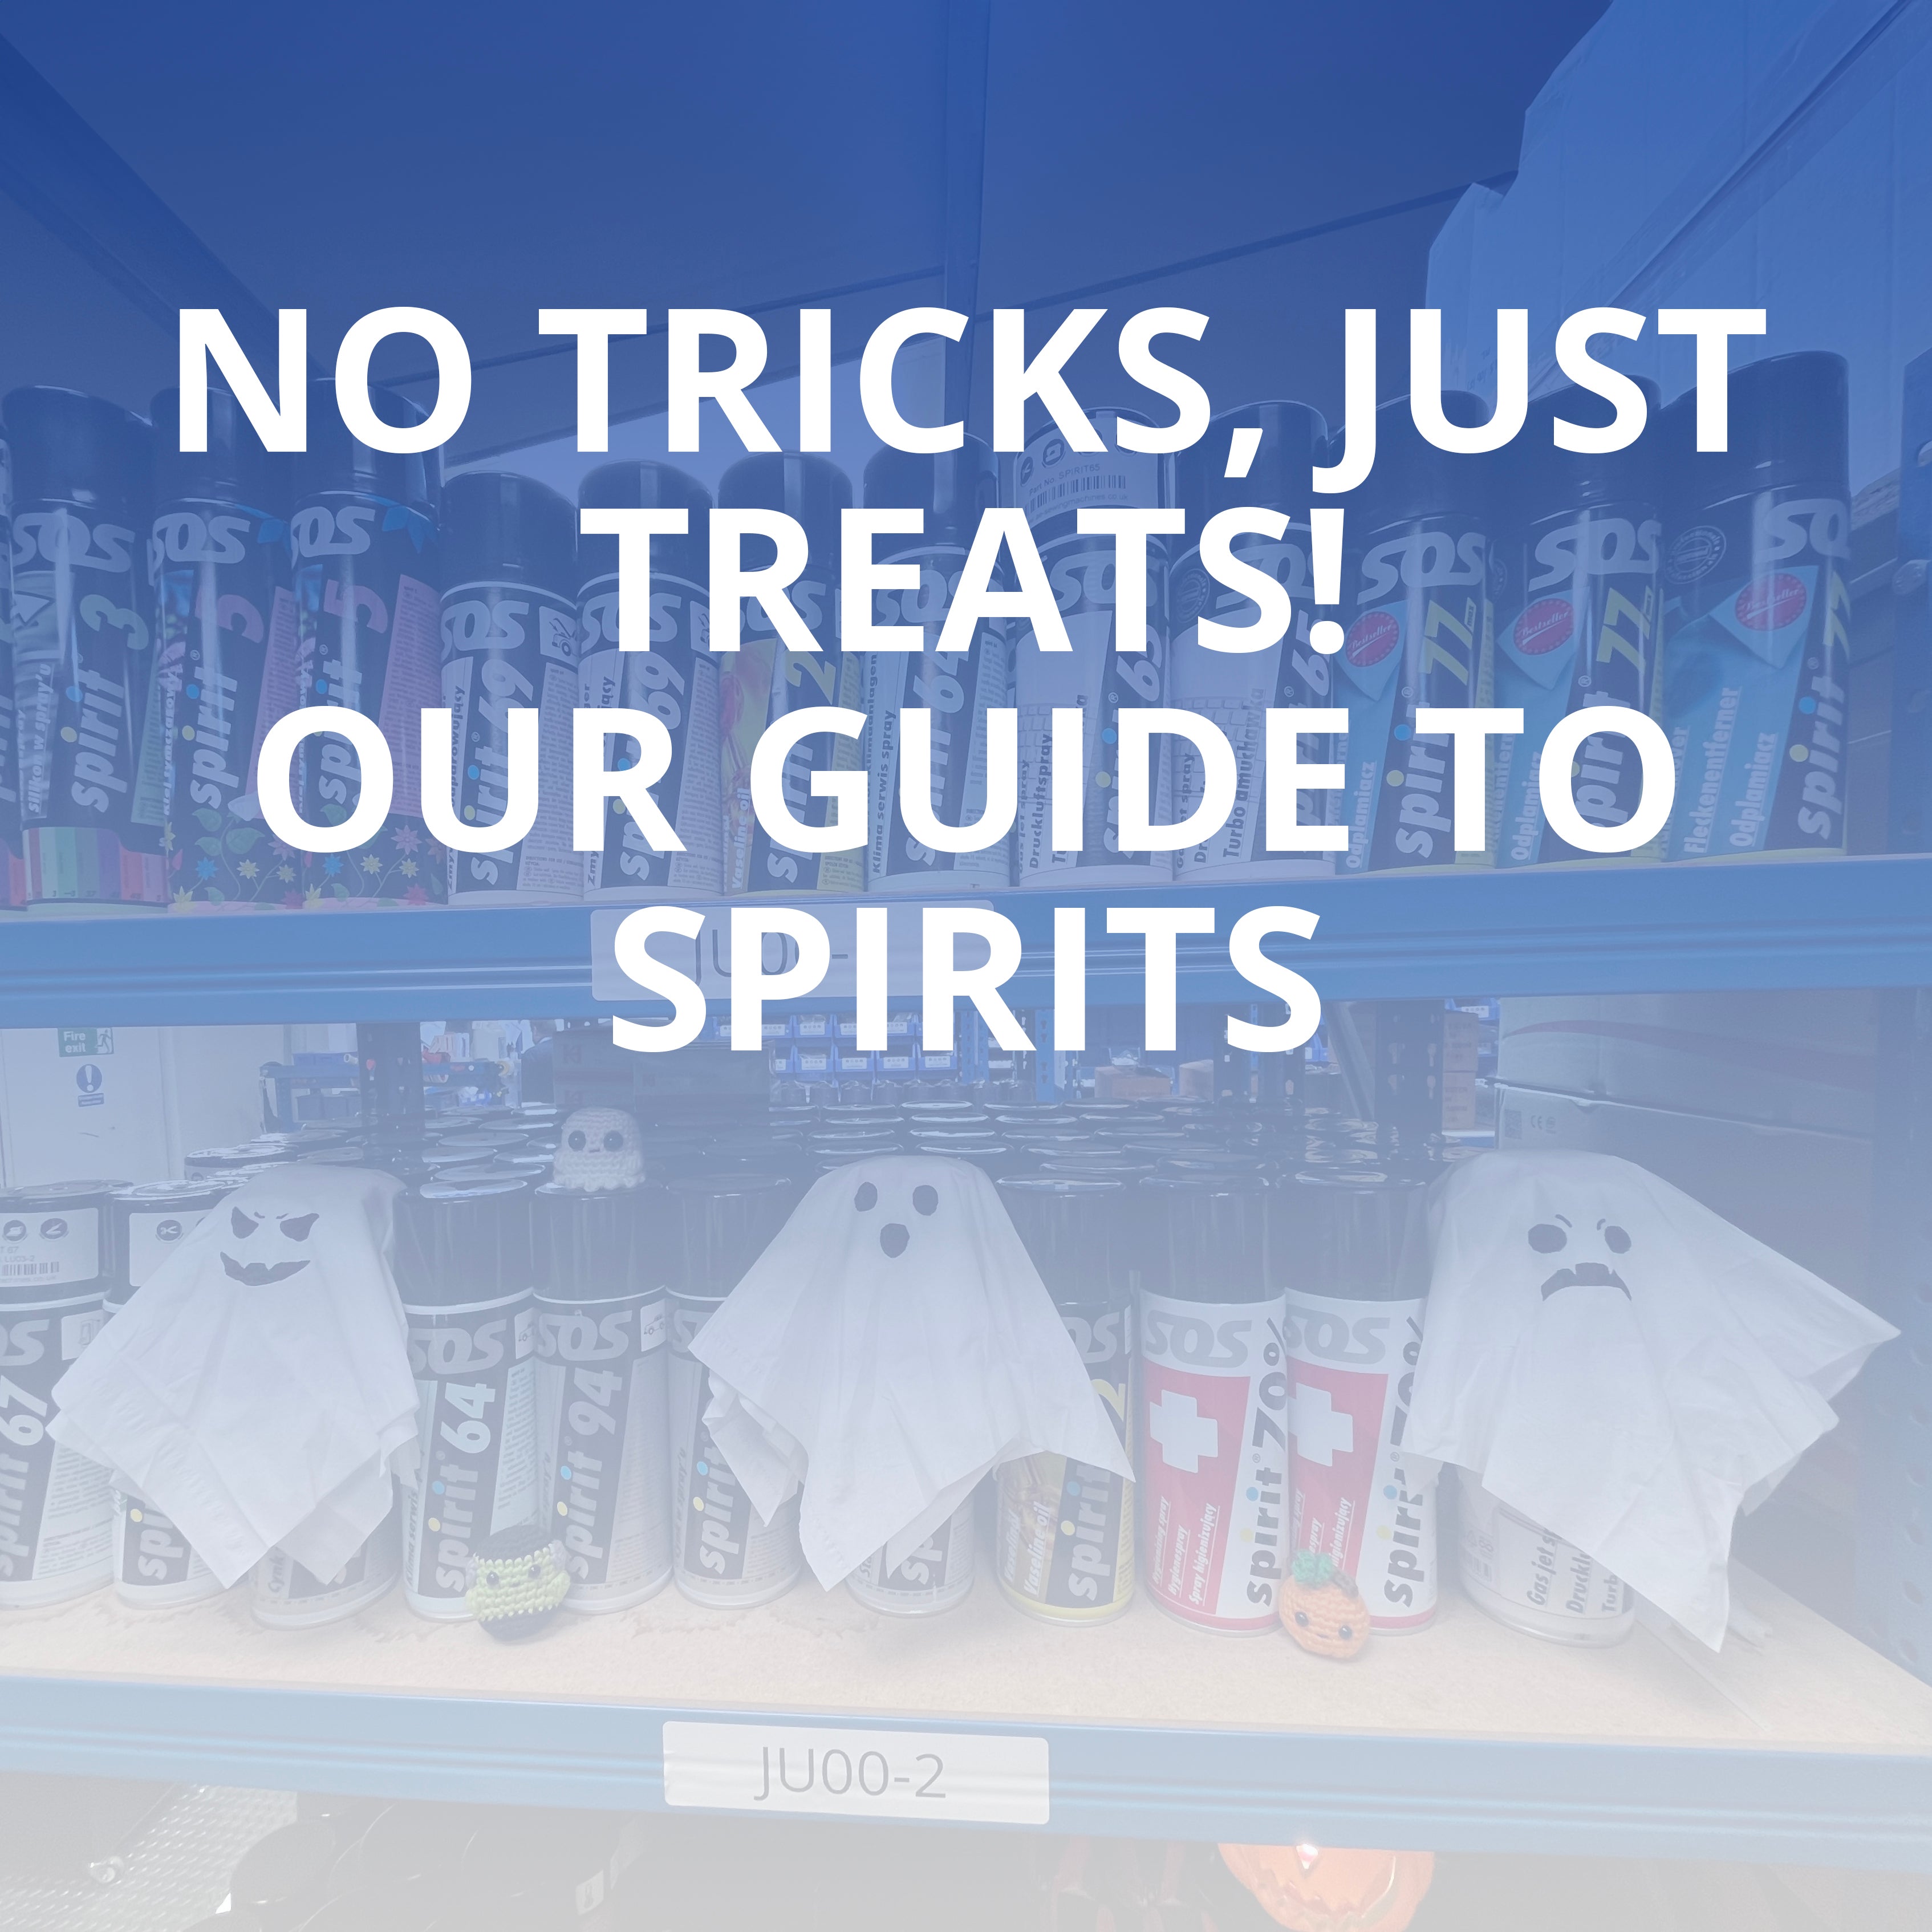 No Tricks, Just Treats! Our Guide to Spirits